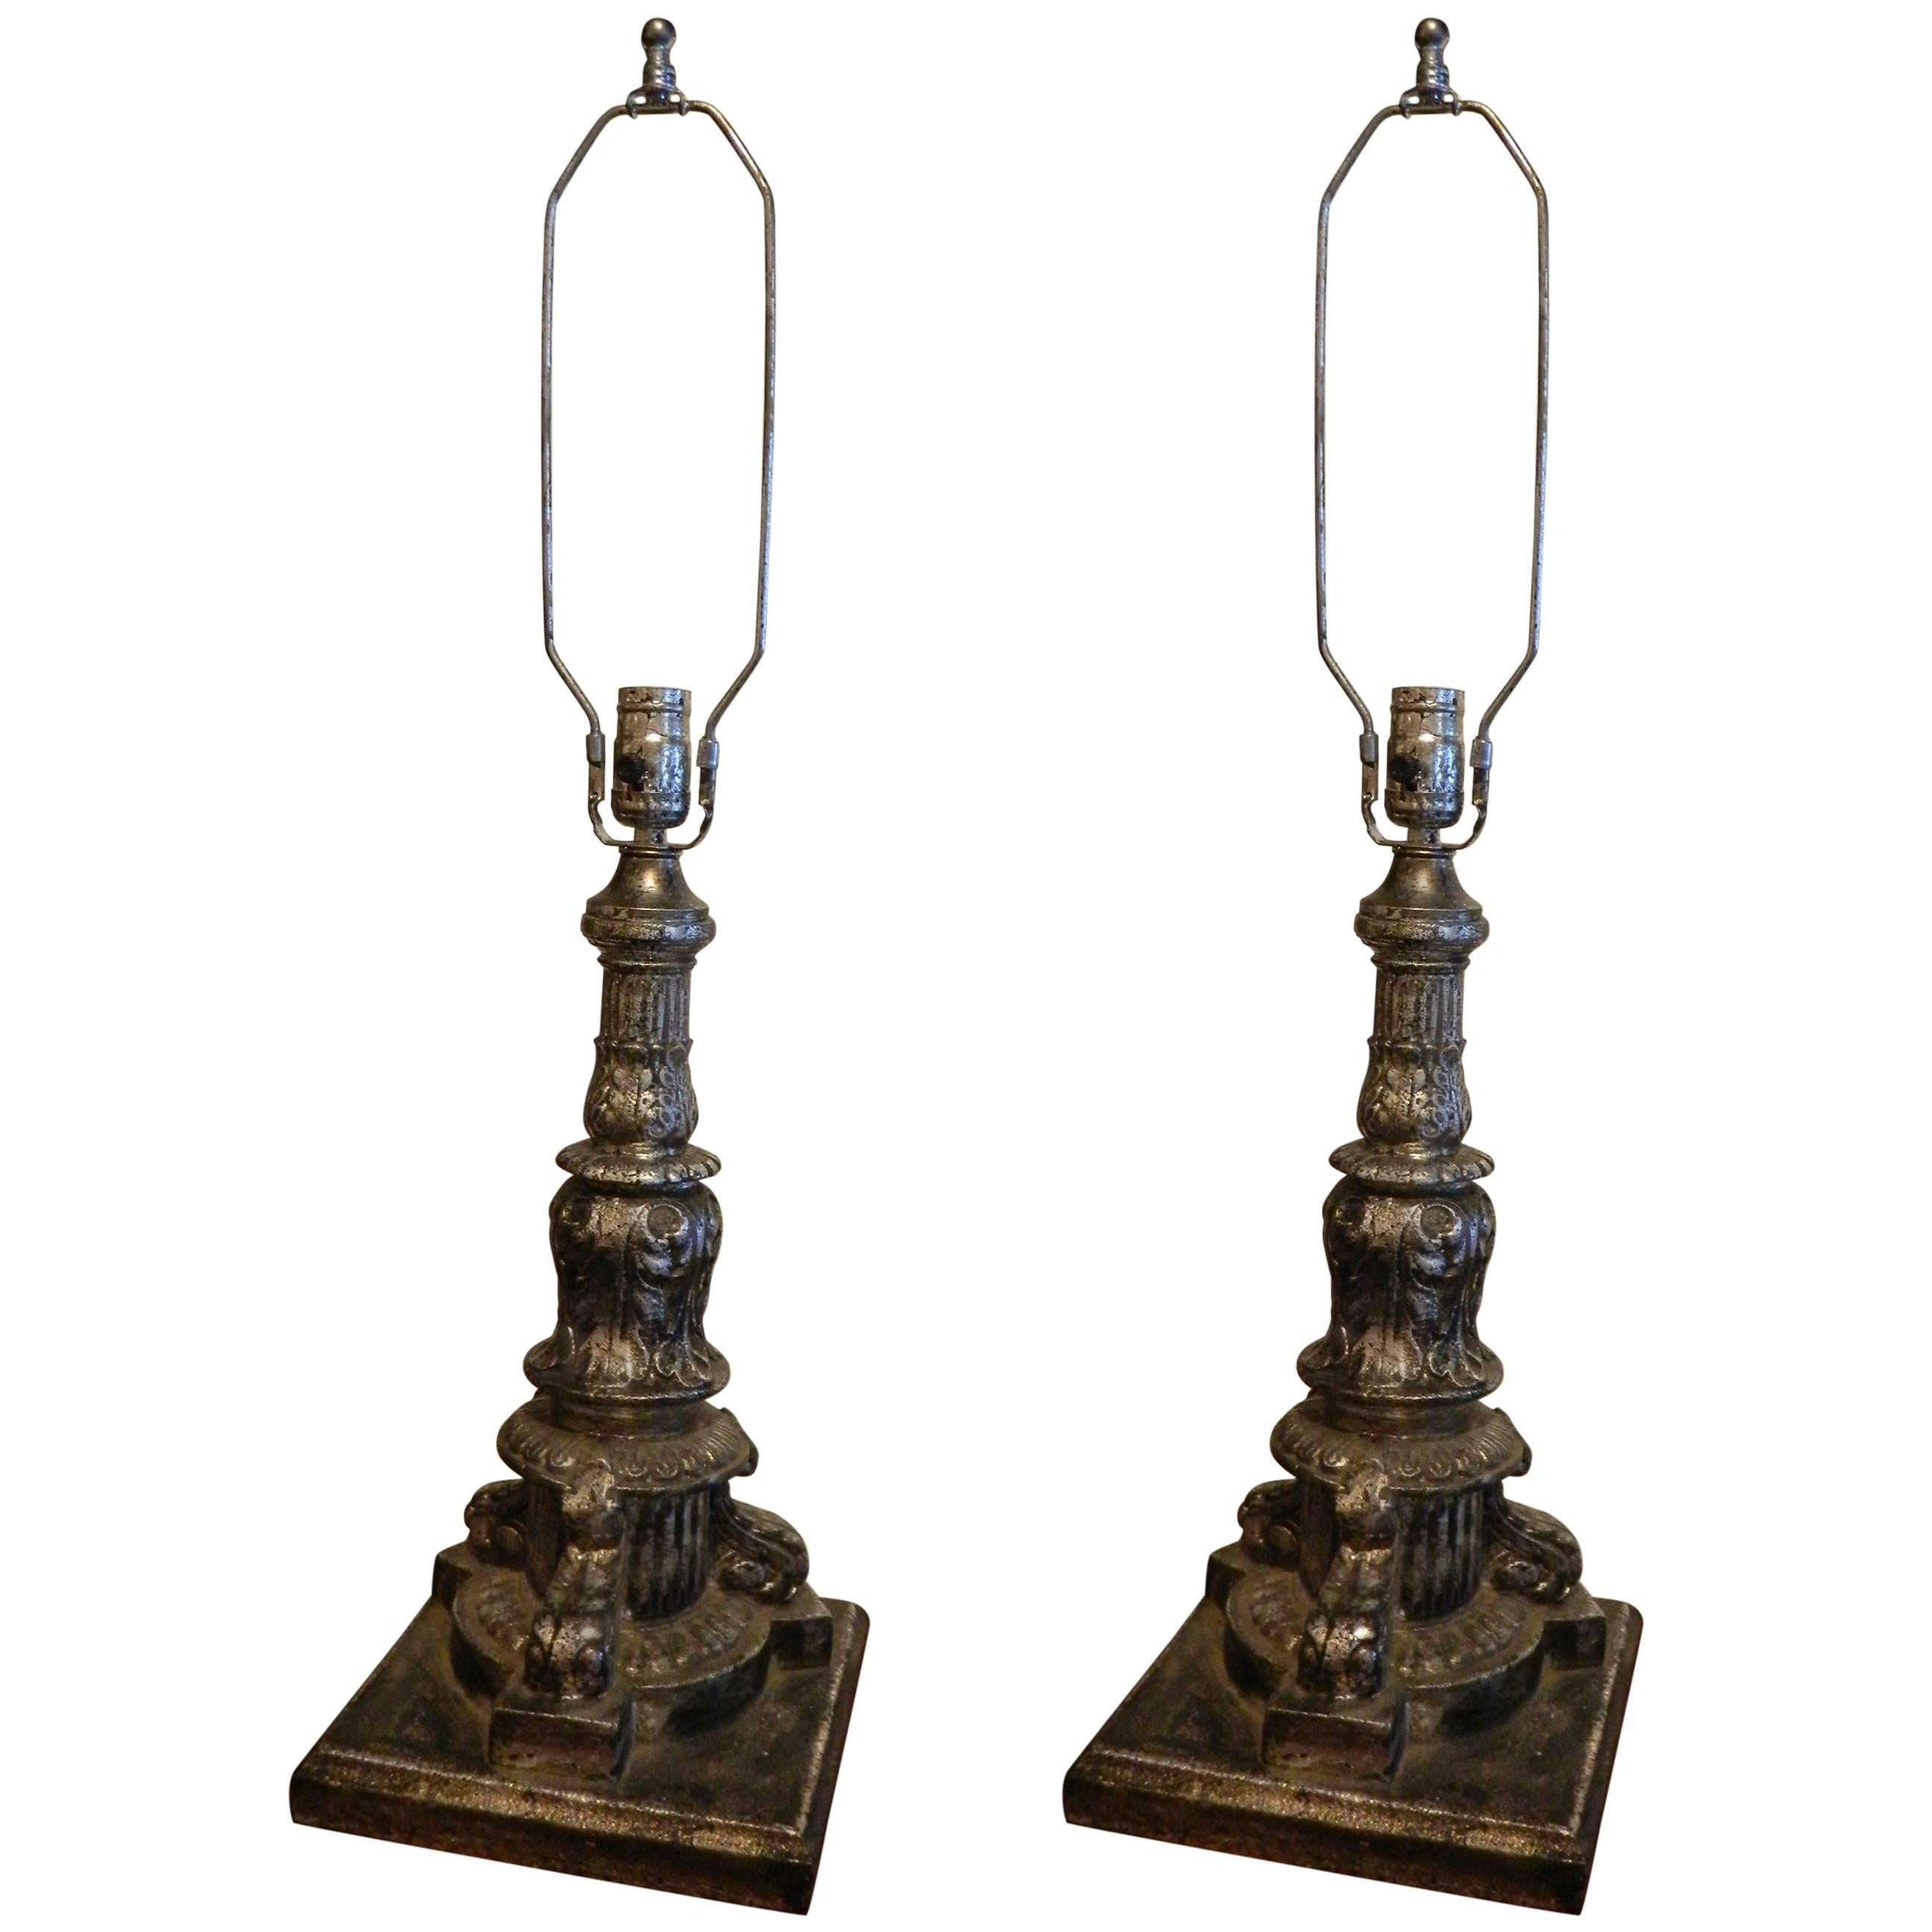 Pair of Iron Silver Leaf Architectural Elements Adapted as Lamps, 19th Century